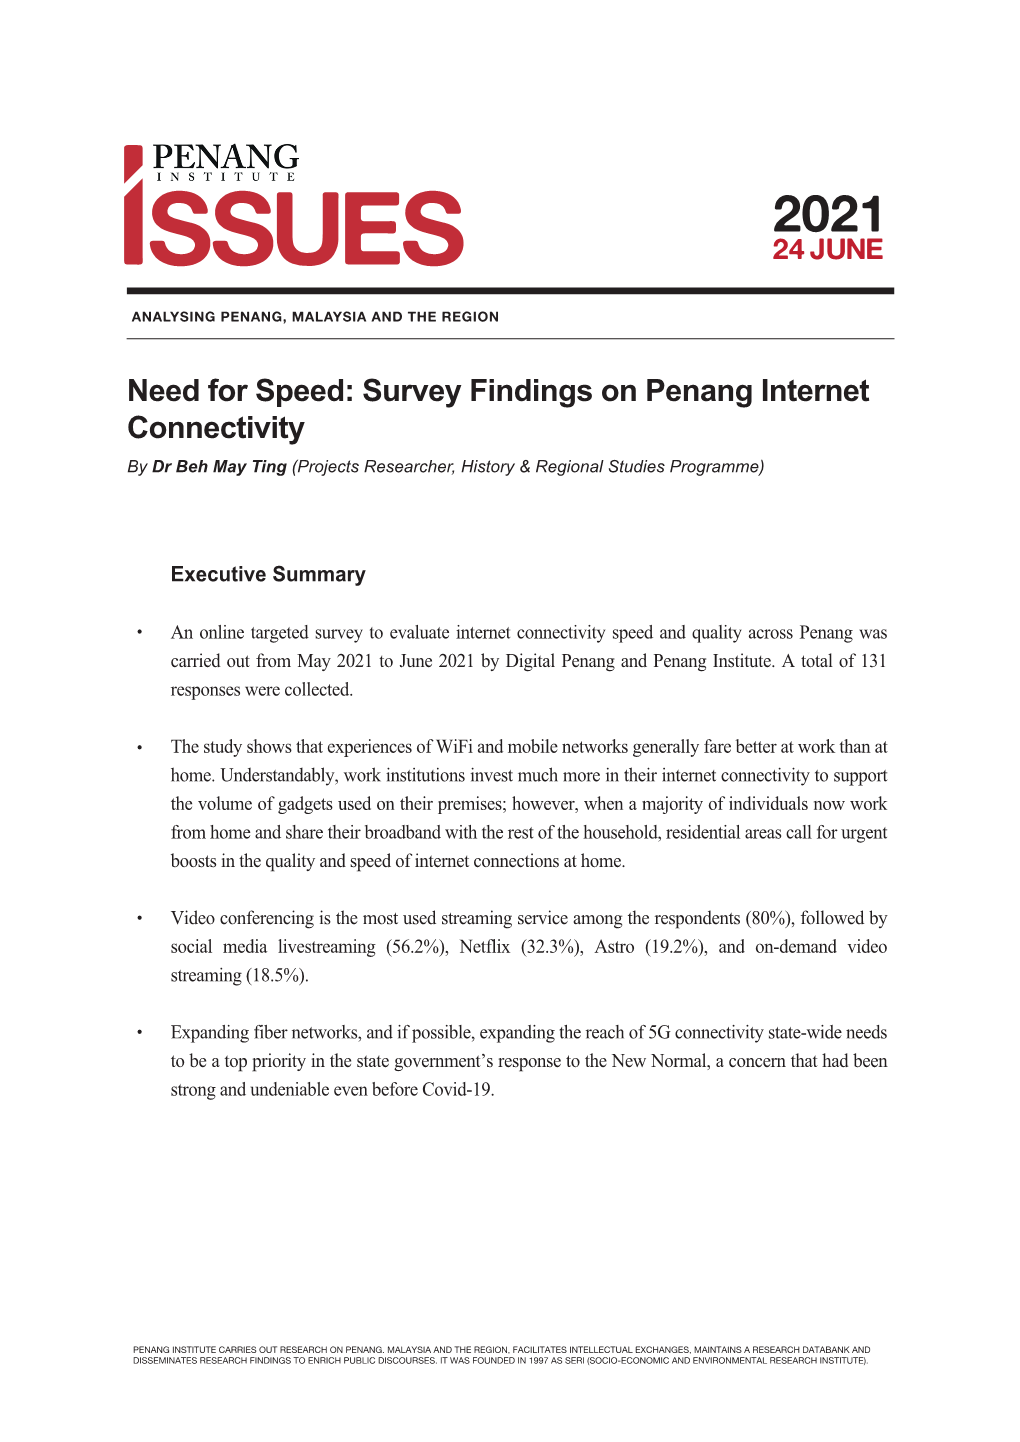 Survey Findings on Penang Internet Connectivity by Dr Beh May Ting (Projects Researcher, History & Regional Studies Programme)